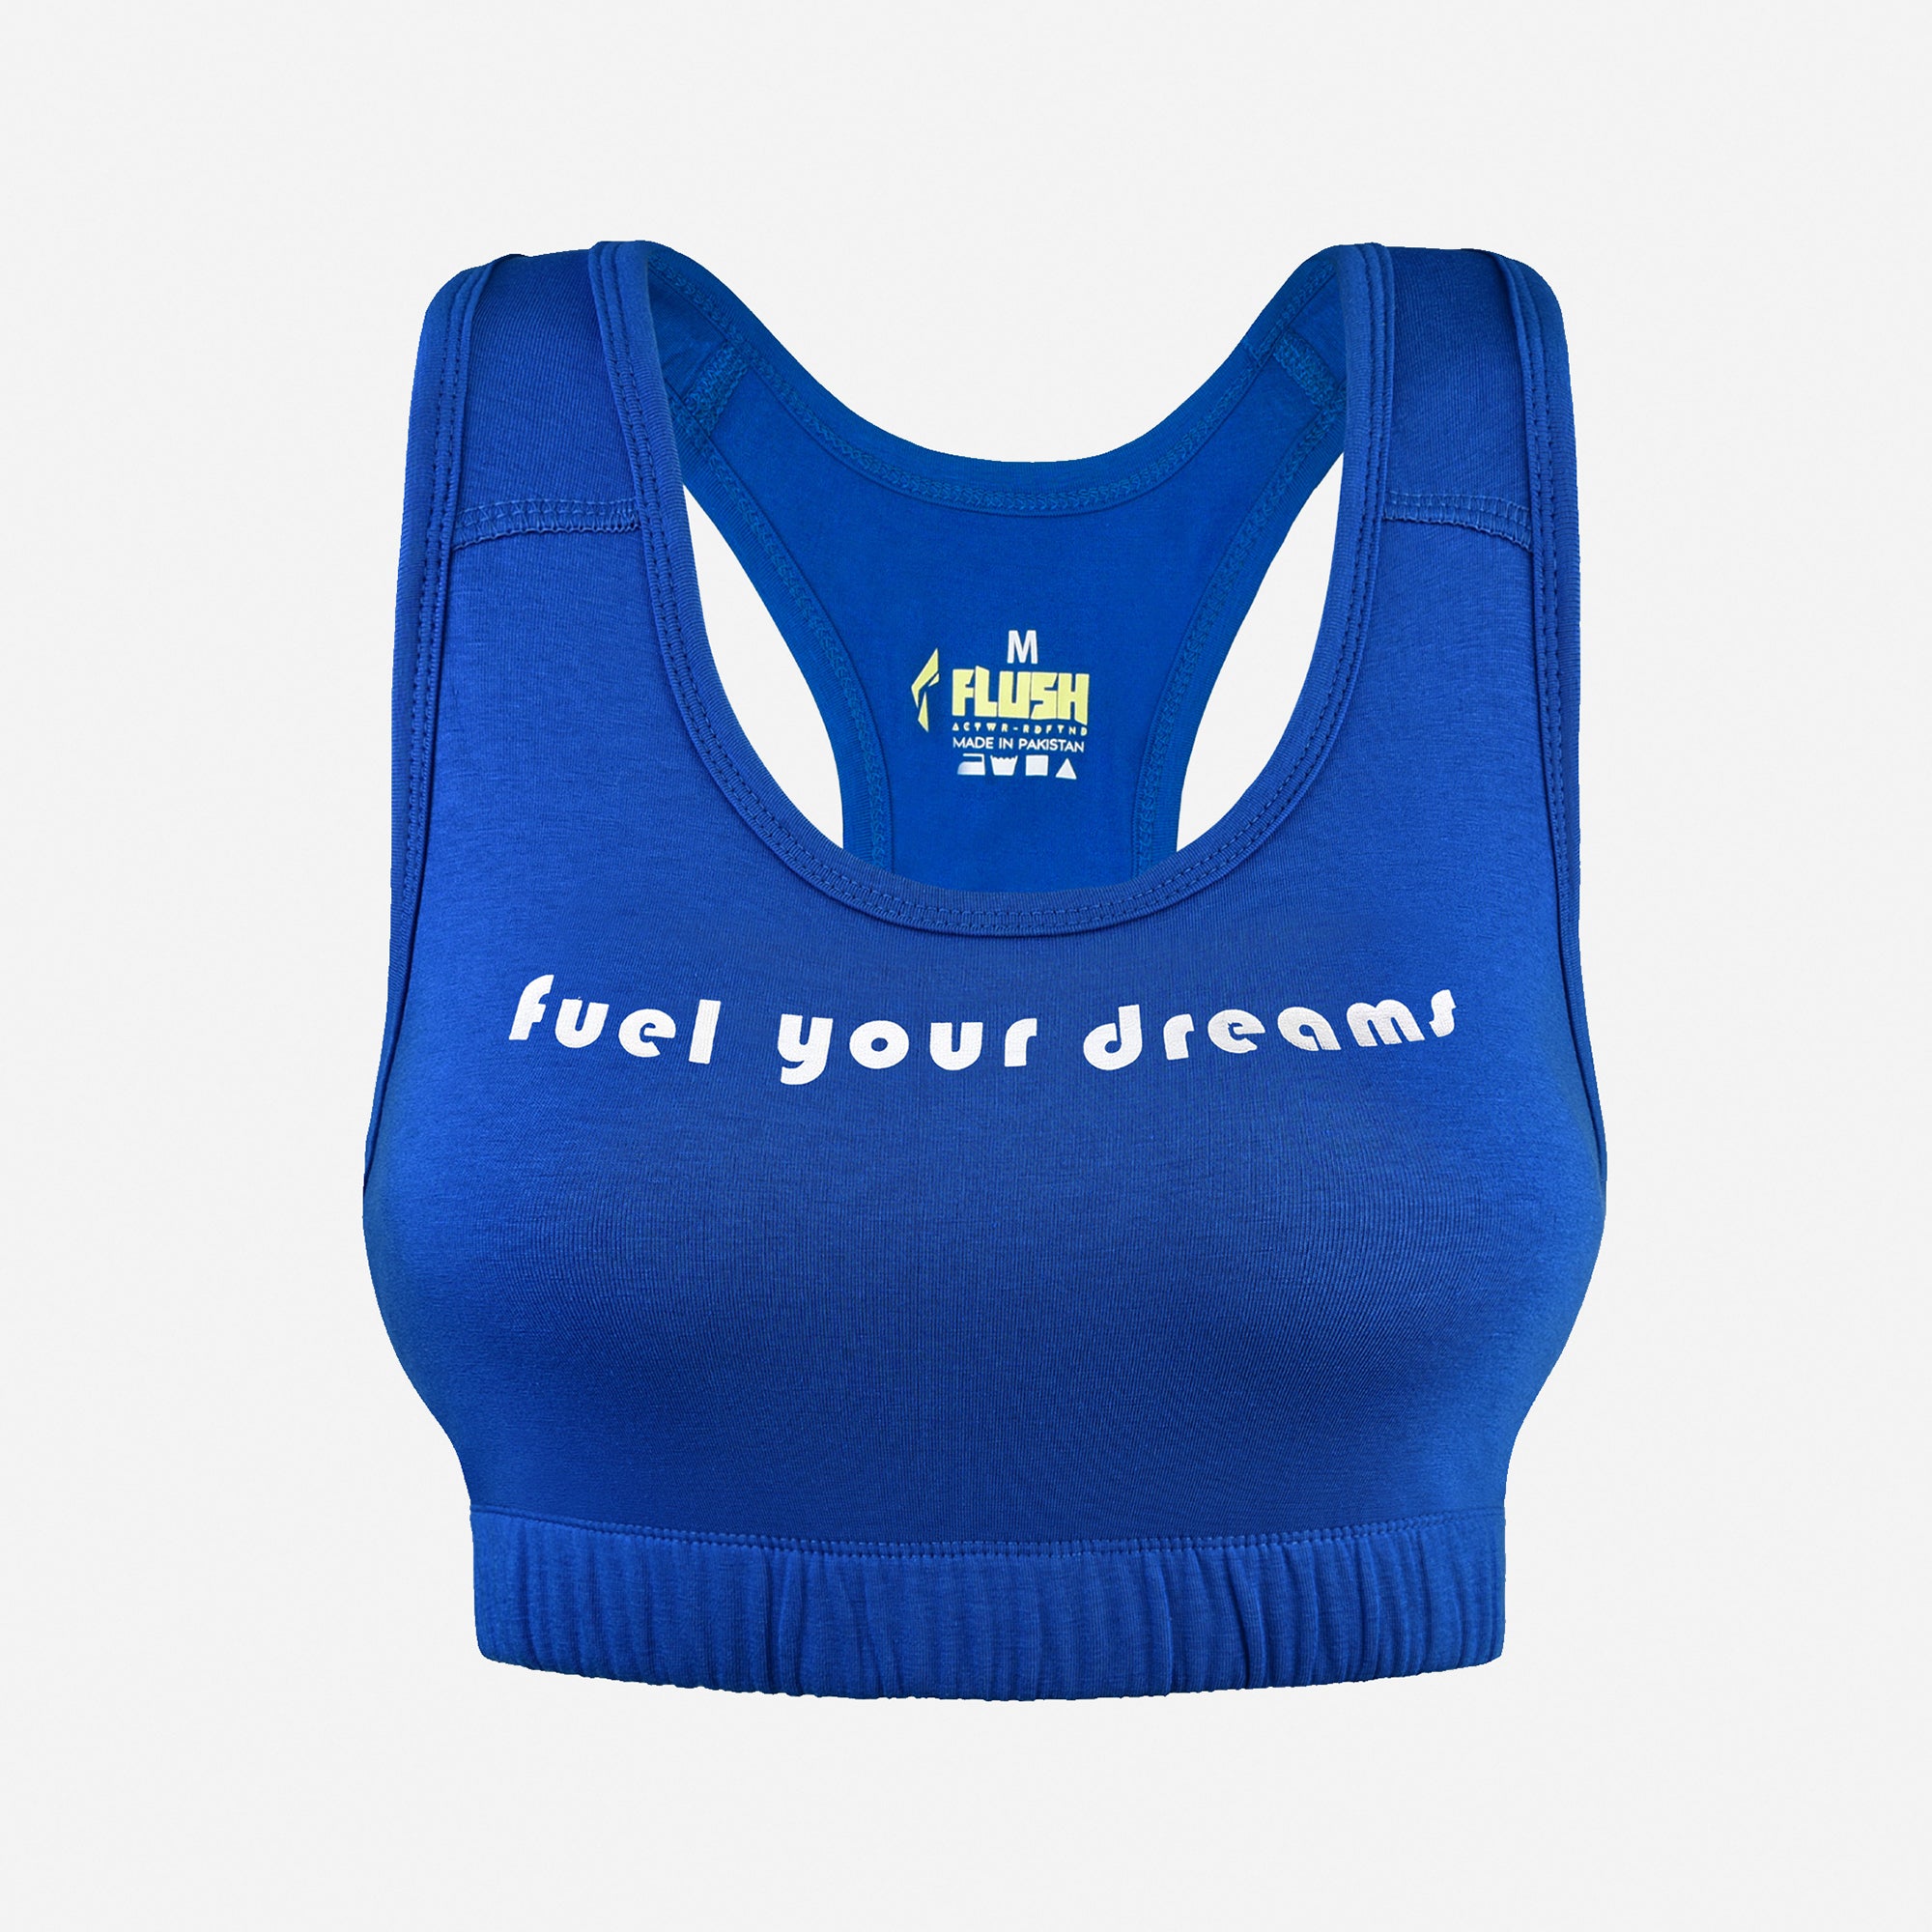 Check Online Sports Bra Price in Pakistan in Royal Blue Color – Flush  Fashion